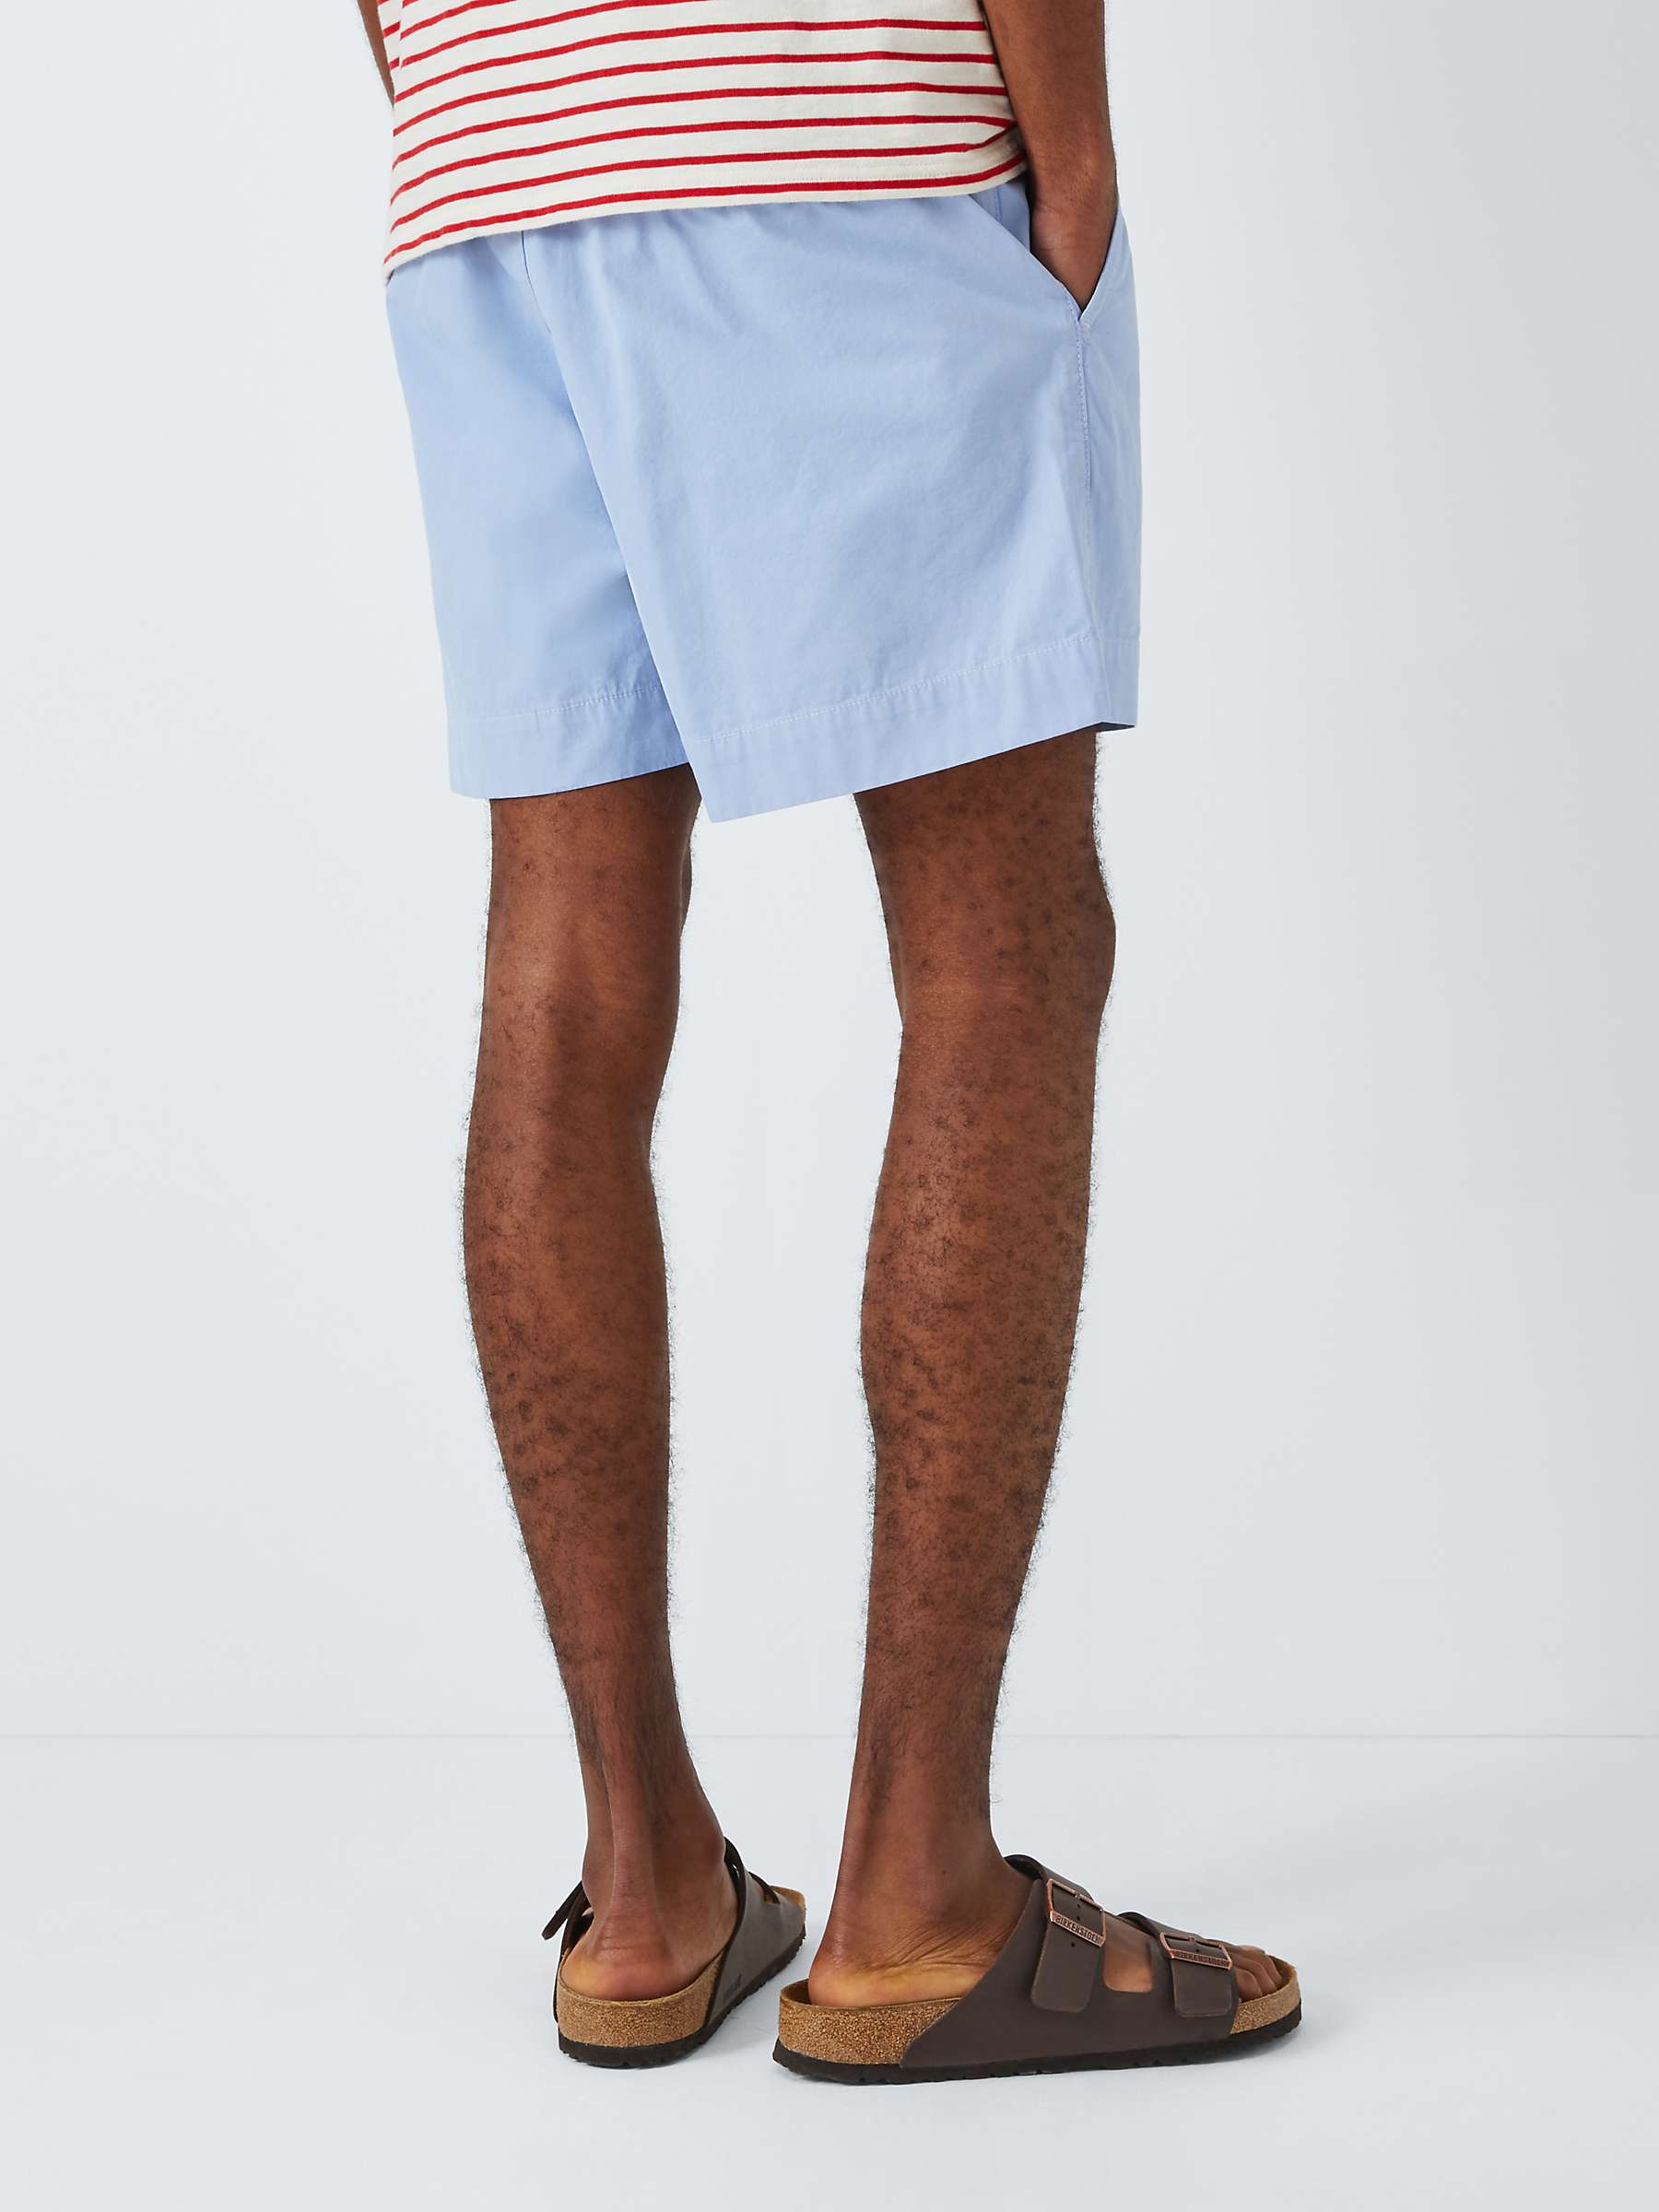 Buy La Paz Relaxed Fit Cotton Shorts, Heather Canvas Online at johnlewis.com